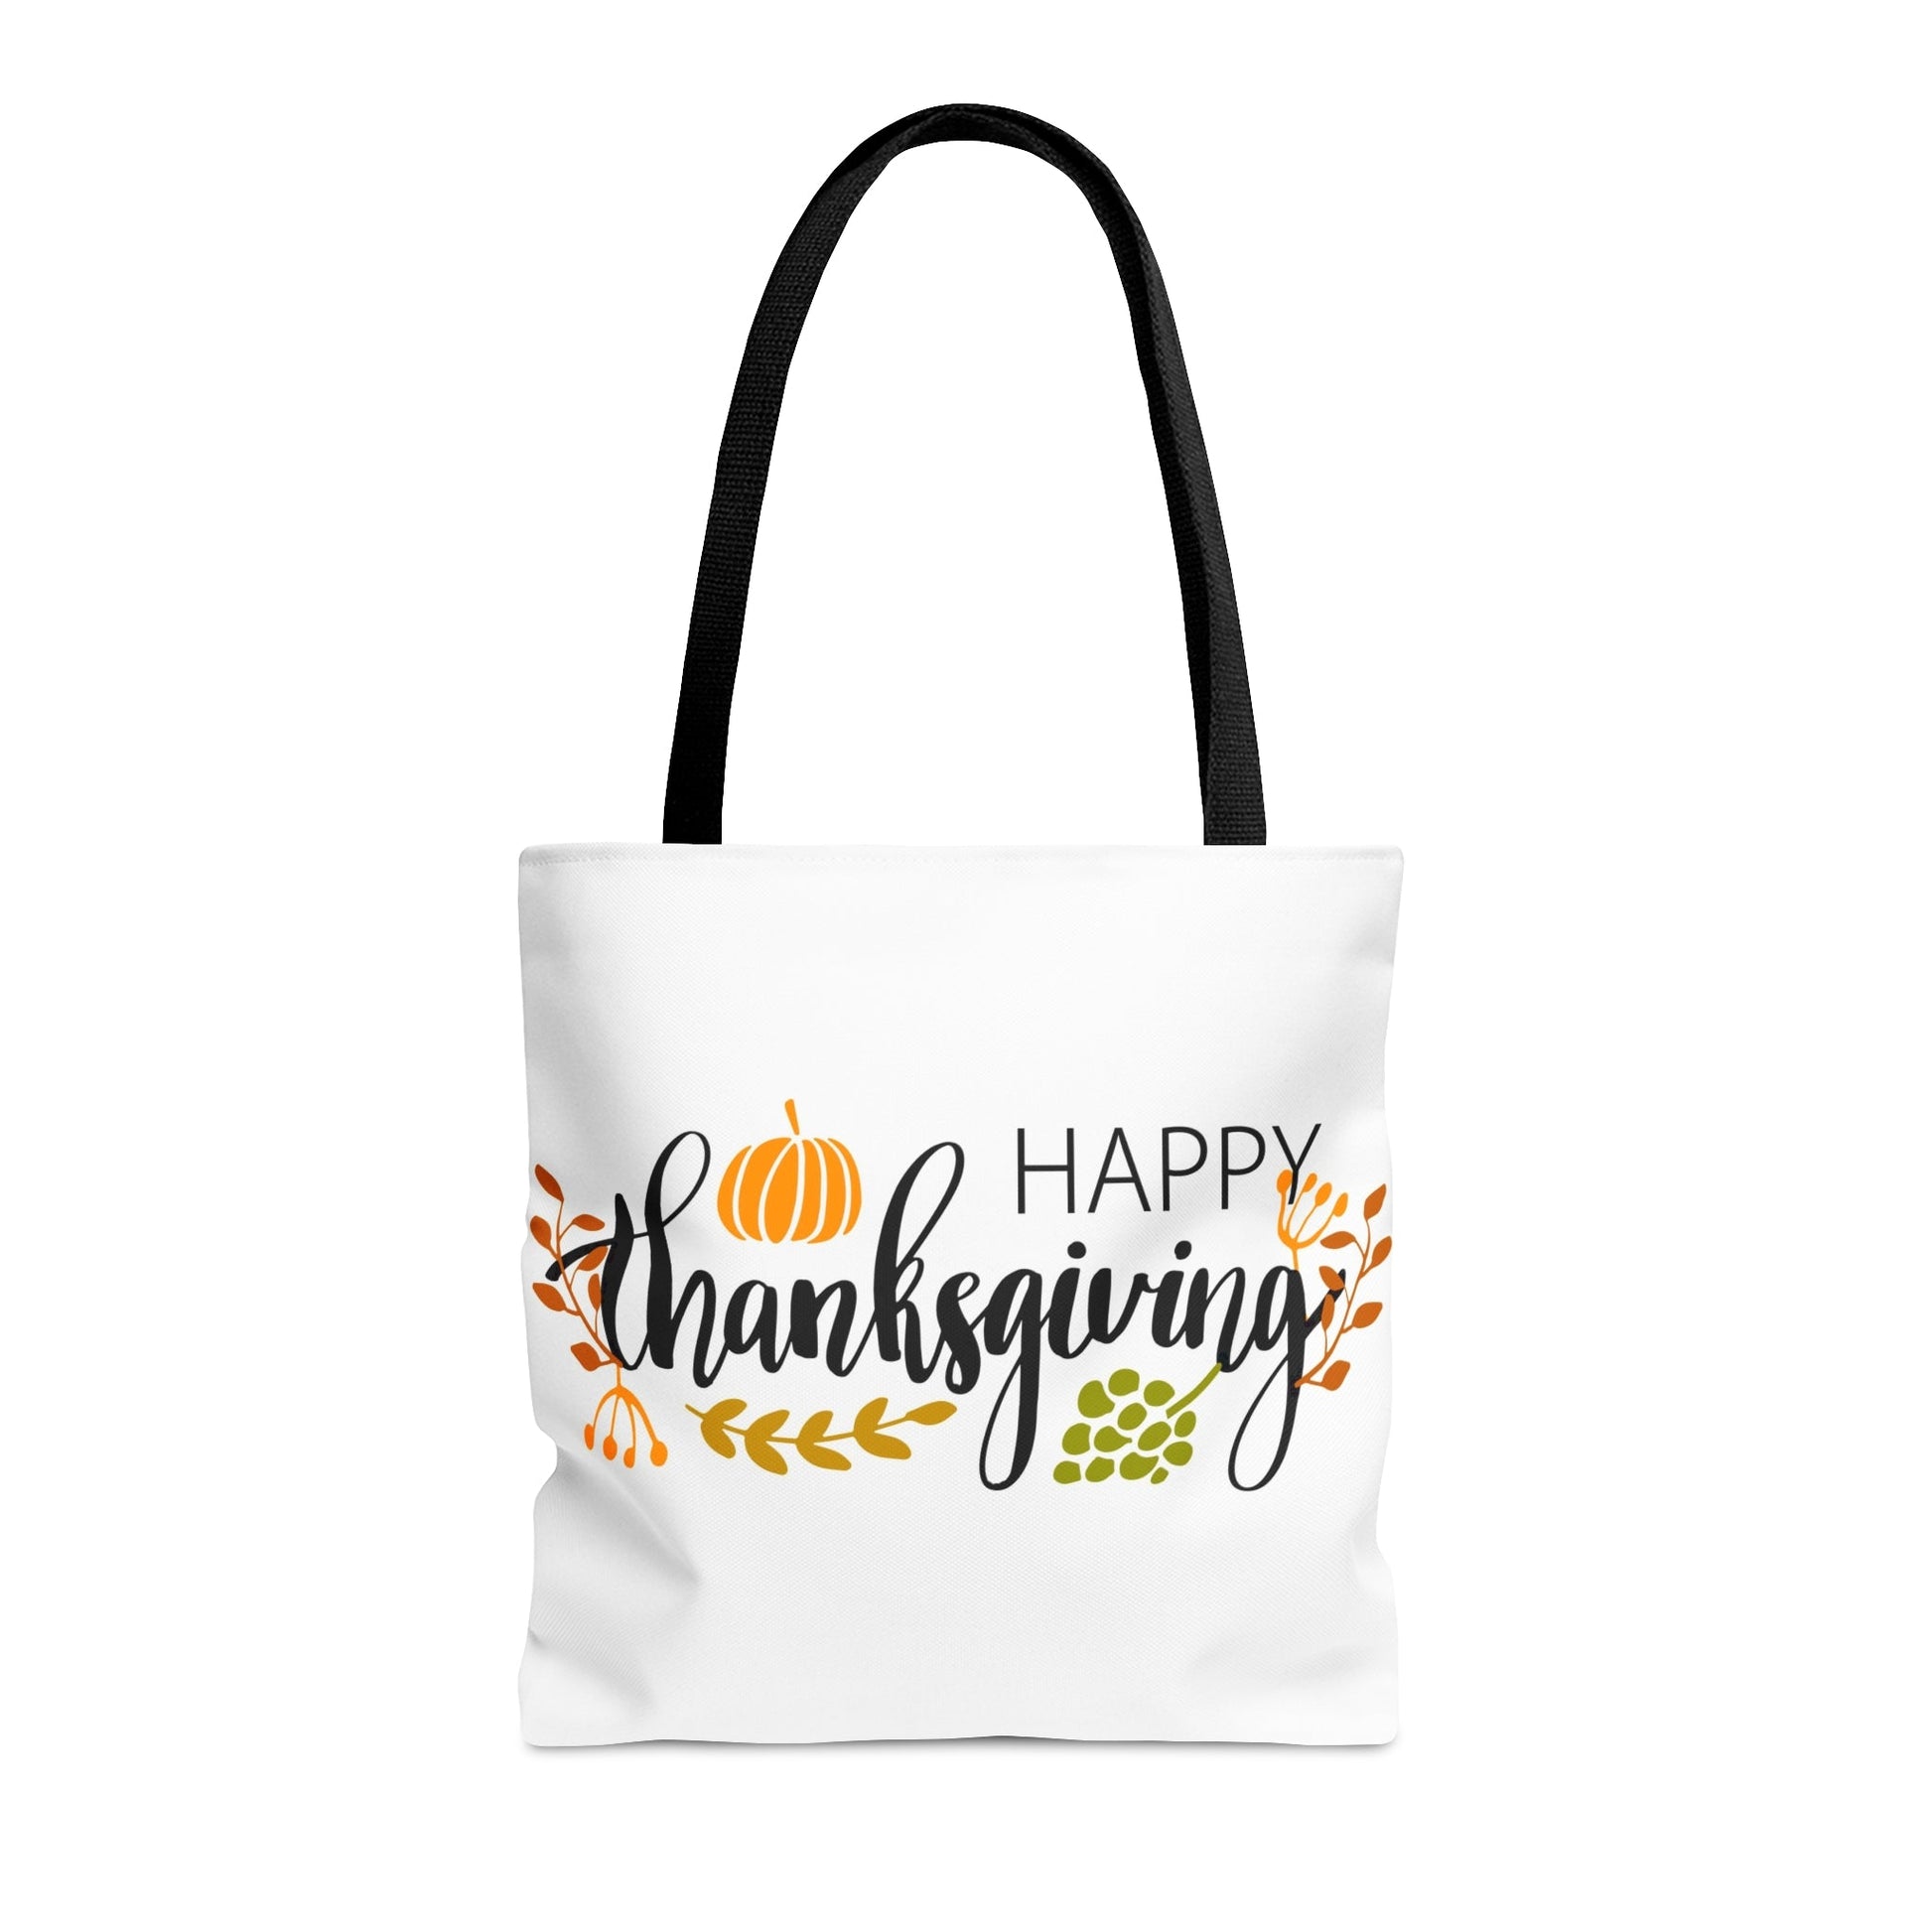 Bags - Happy Thanksgiving Tote Bag